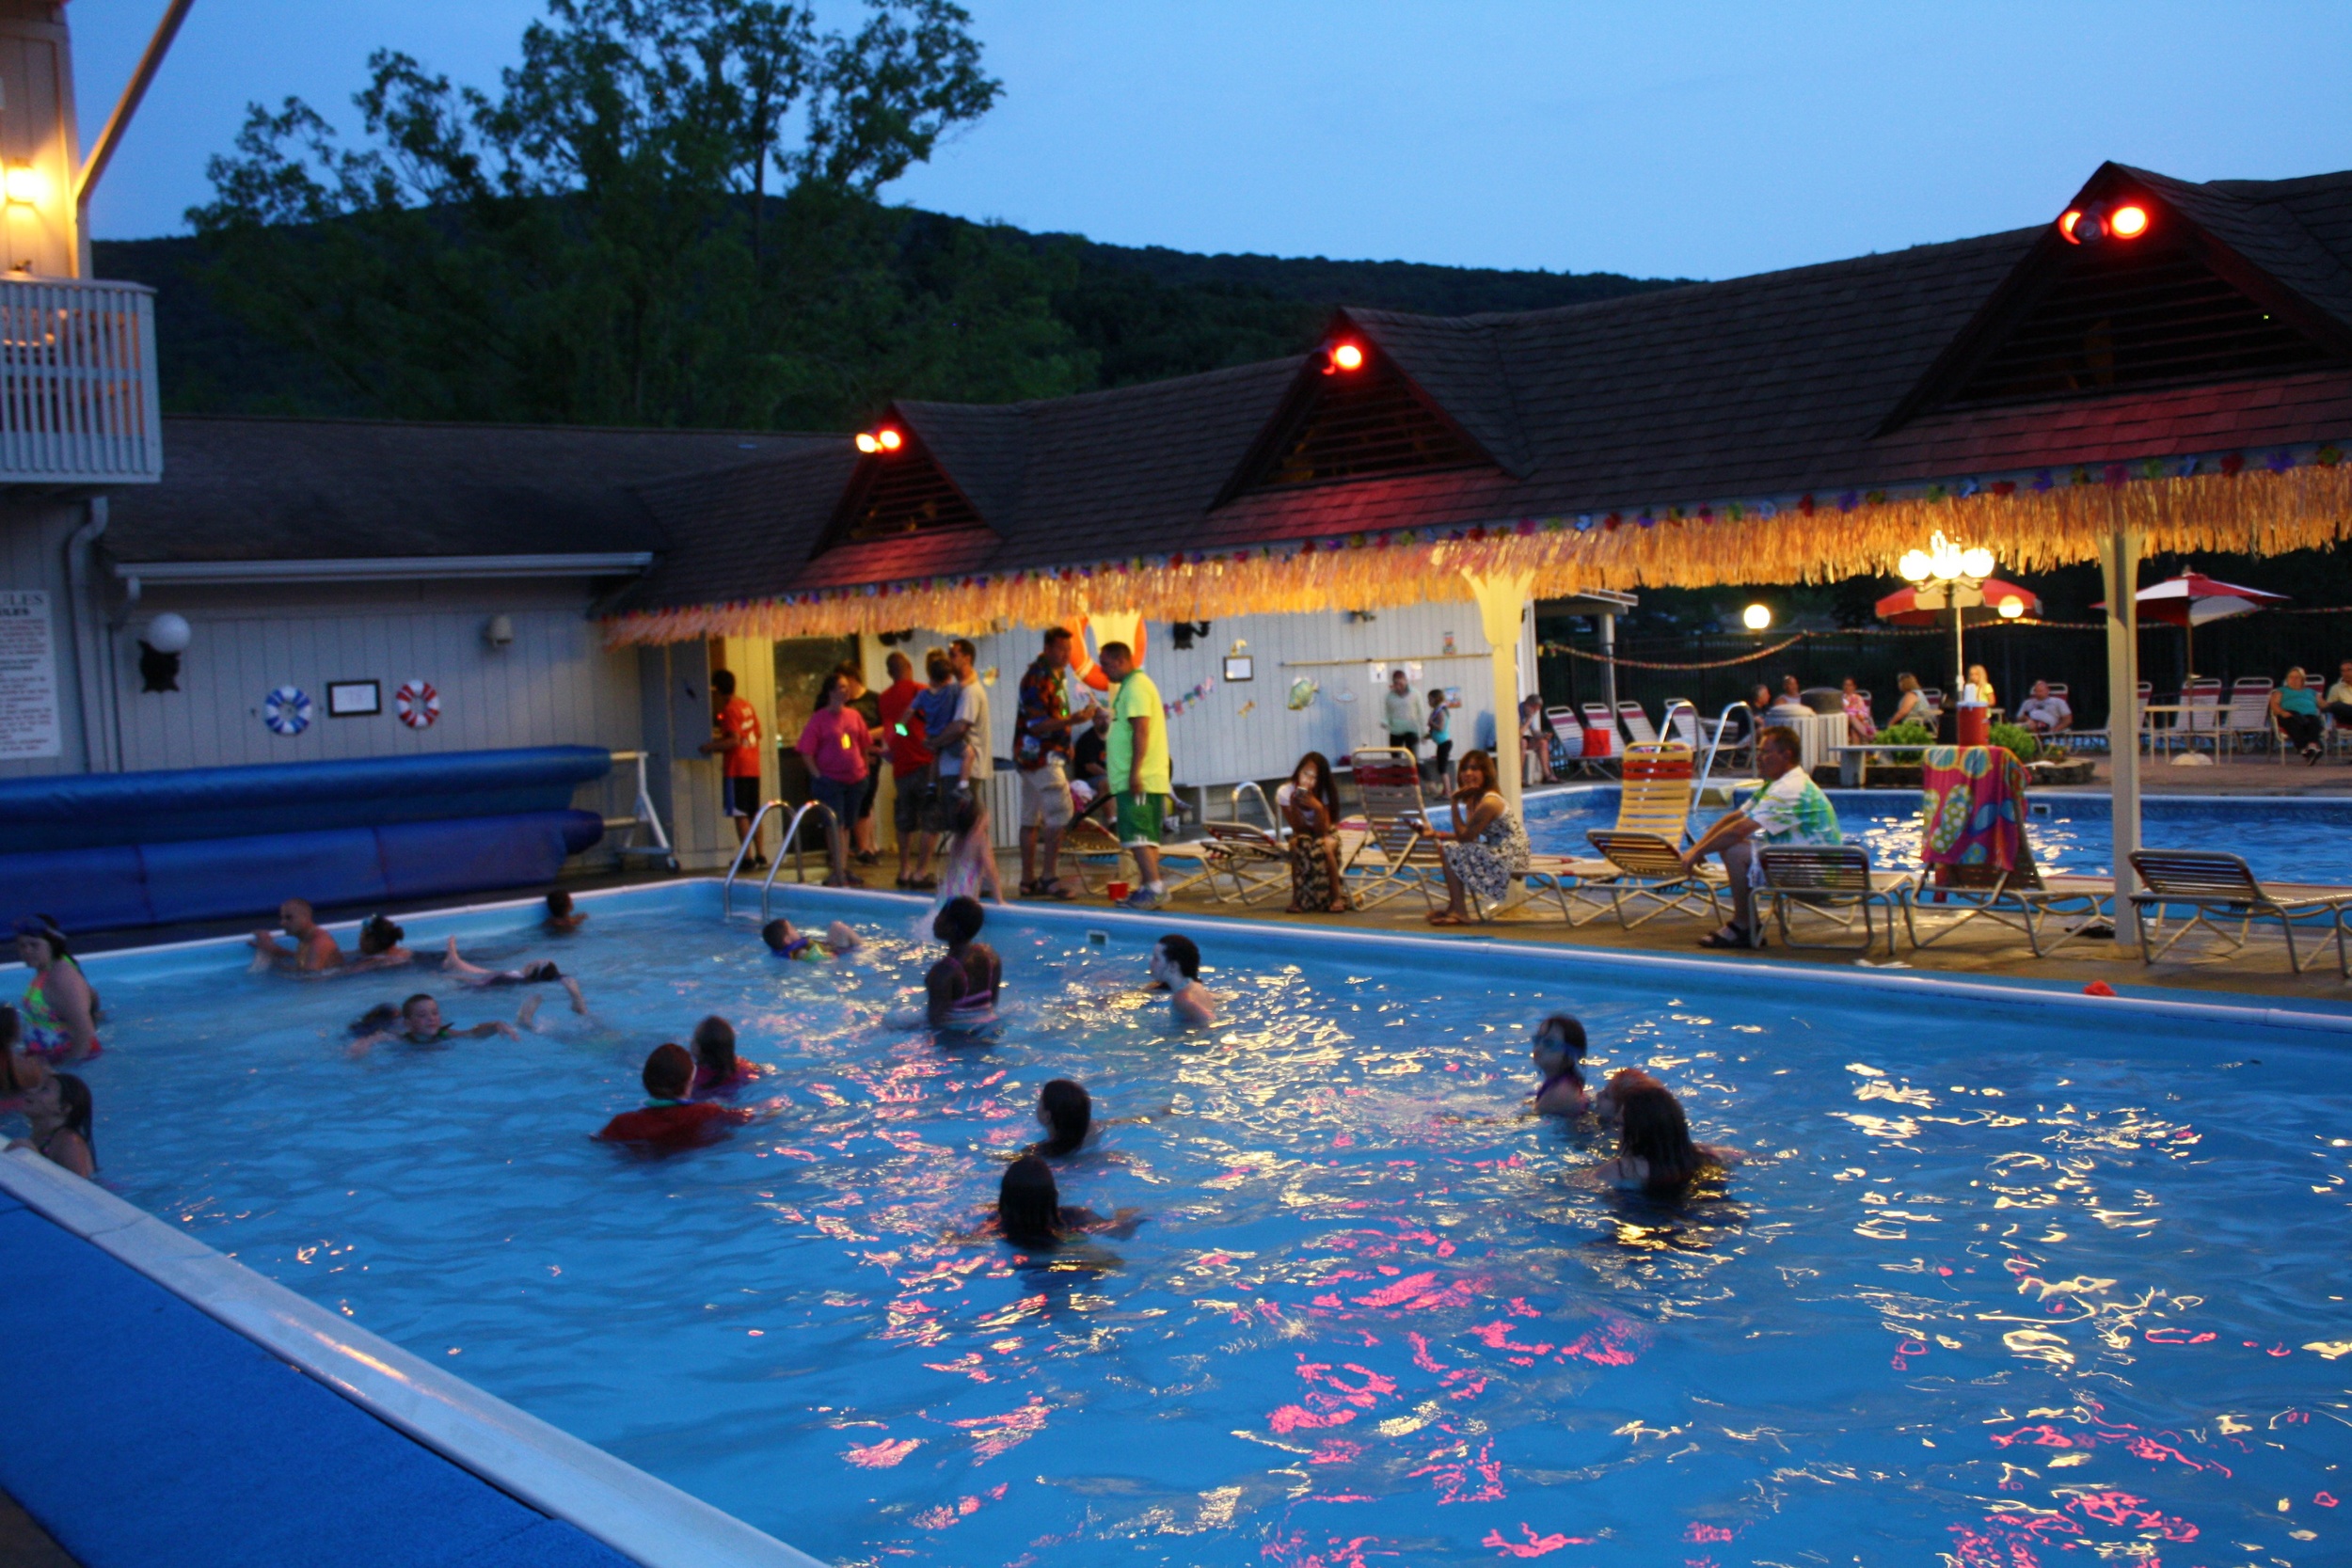 pools are open until 10pm